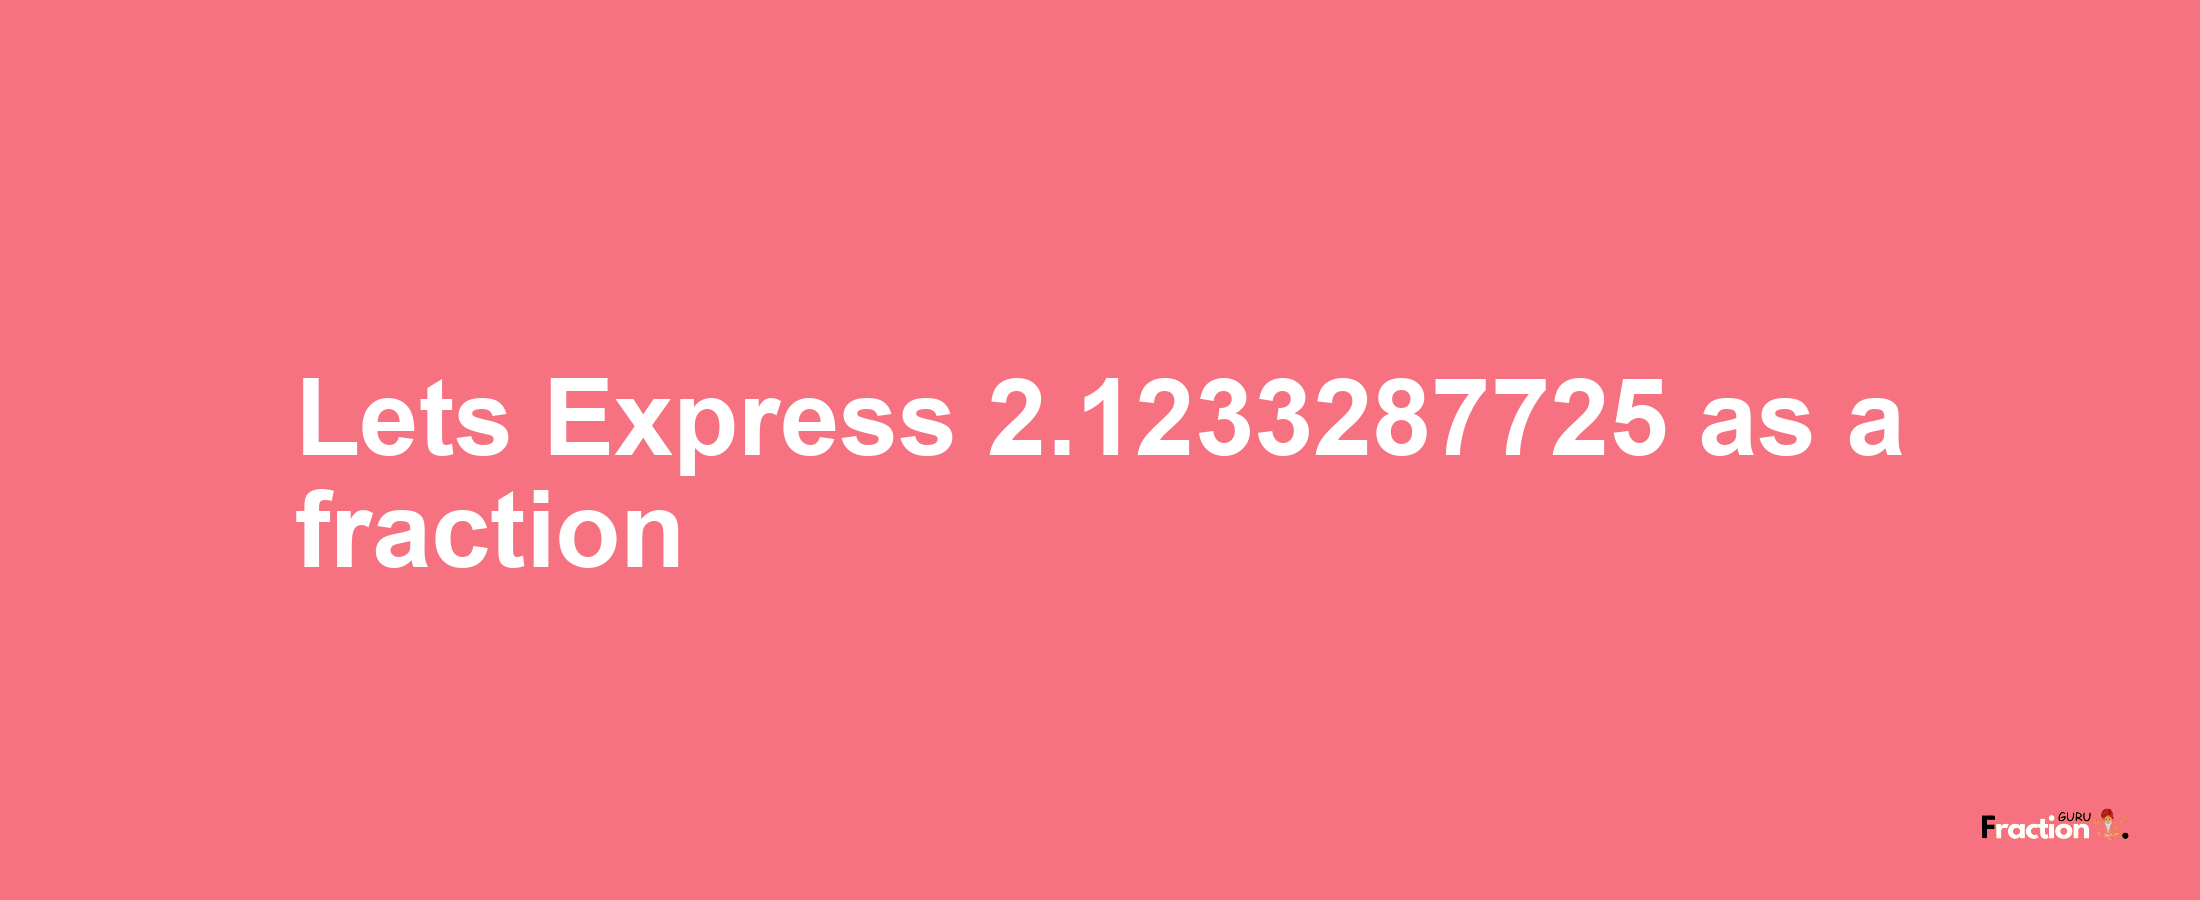 Lets Express 2.1233287725 as afraction